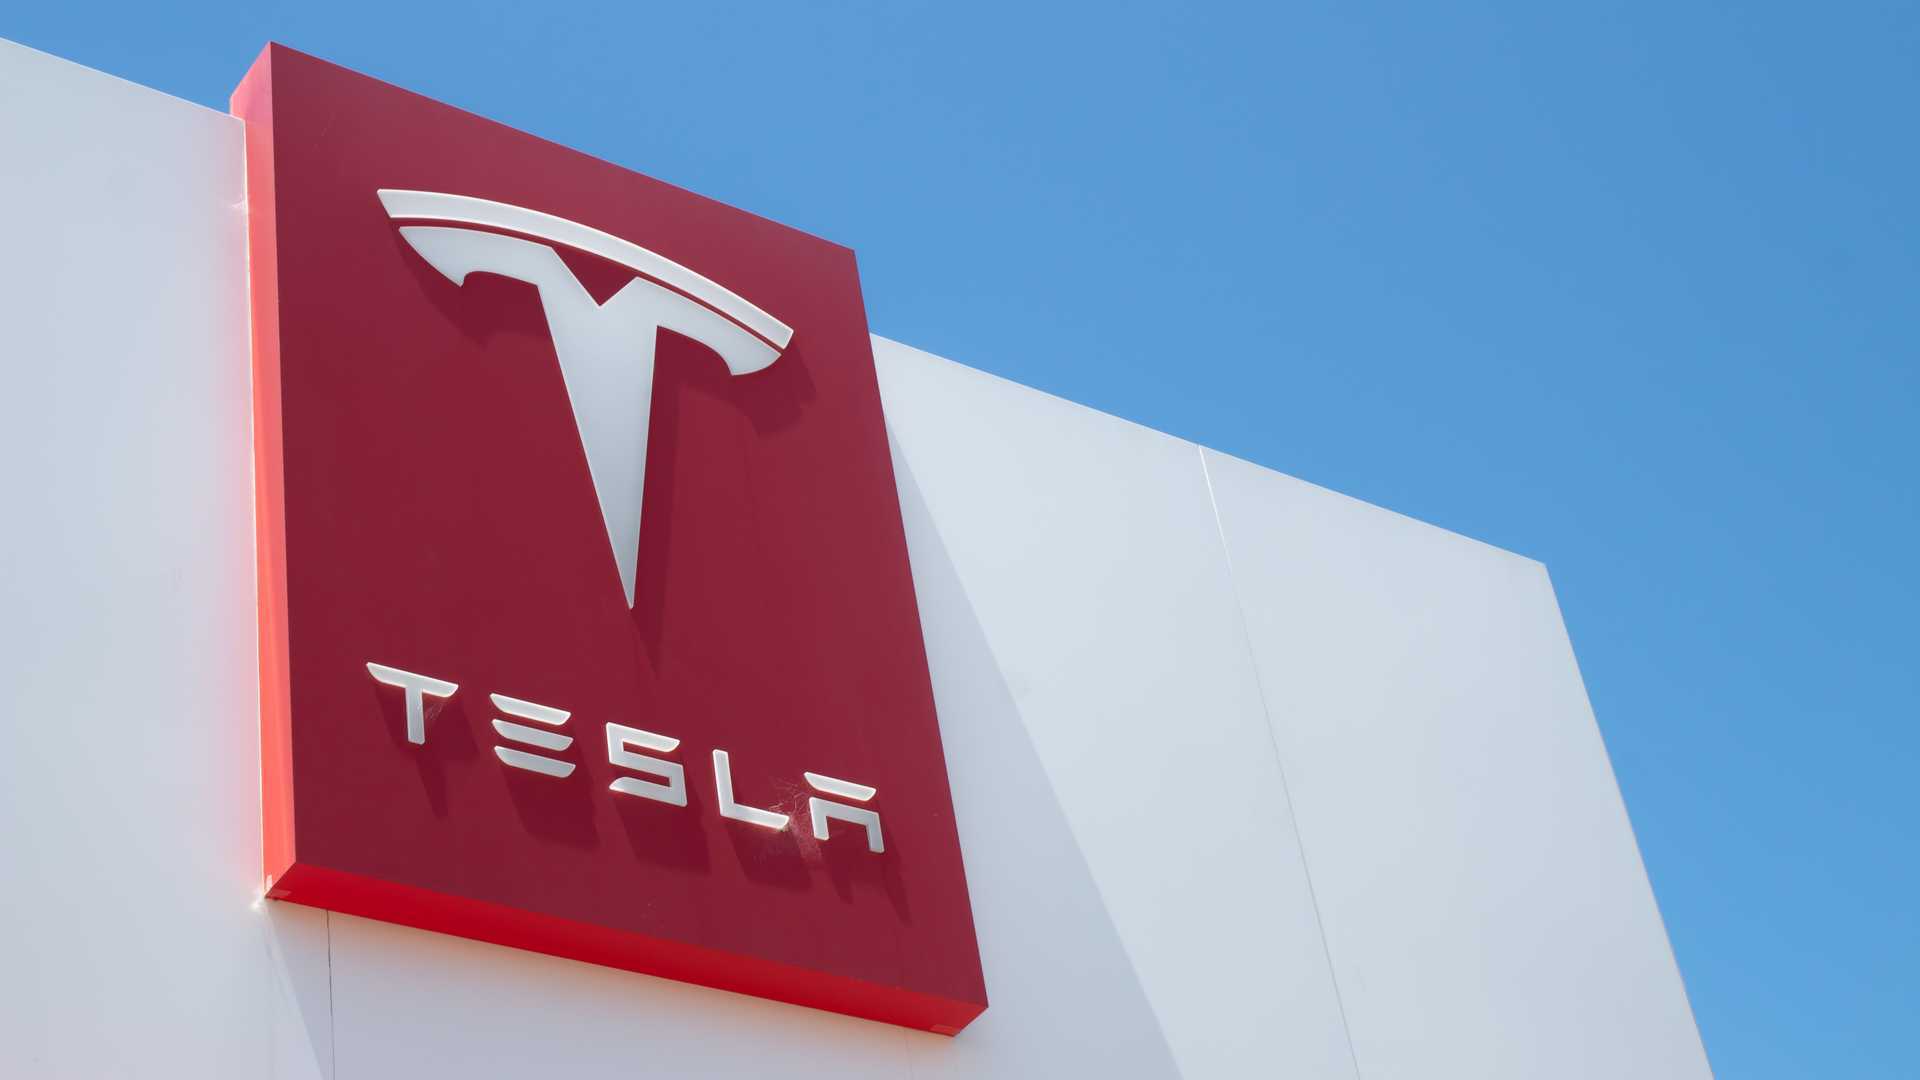 Tesla must pay $137 million to a Black employee who sued for racial discrimination.